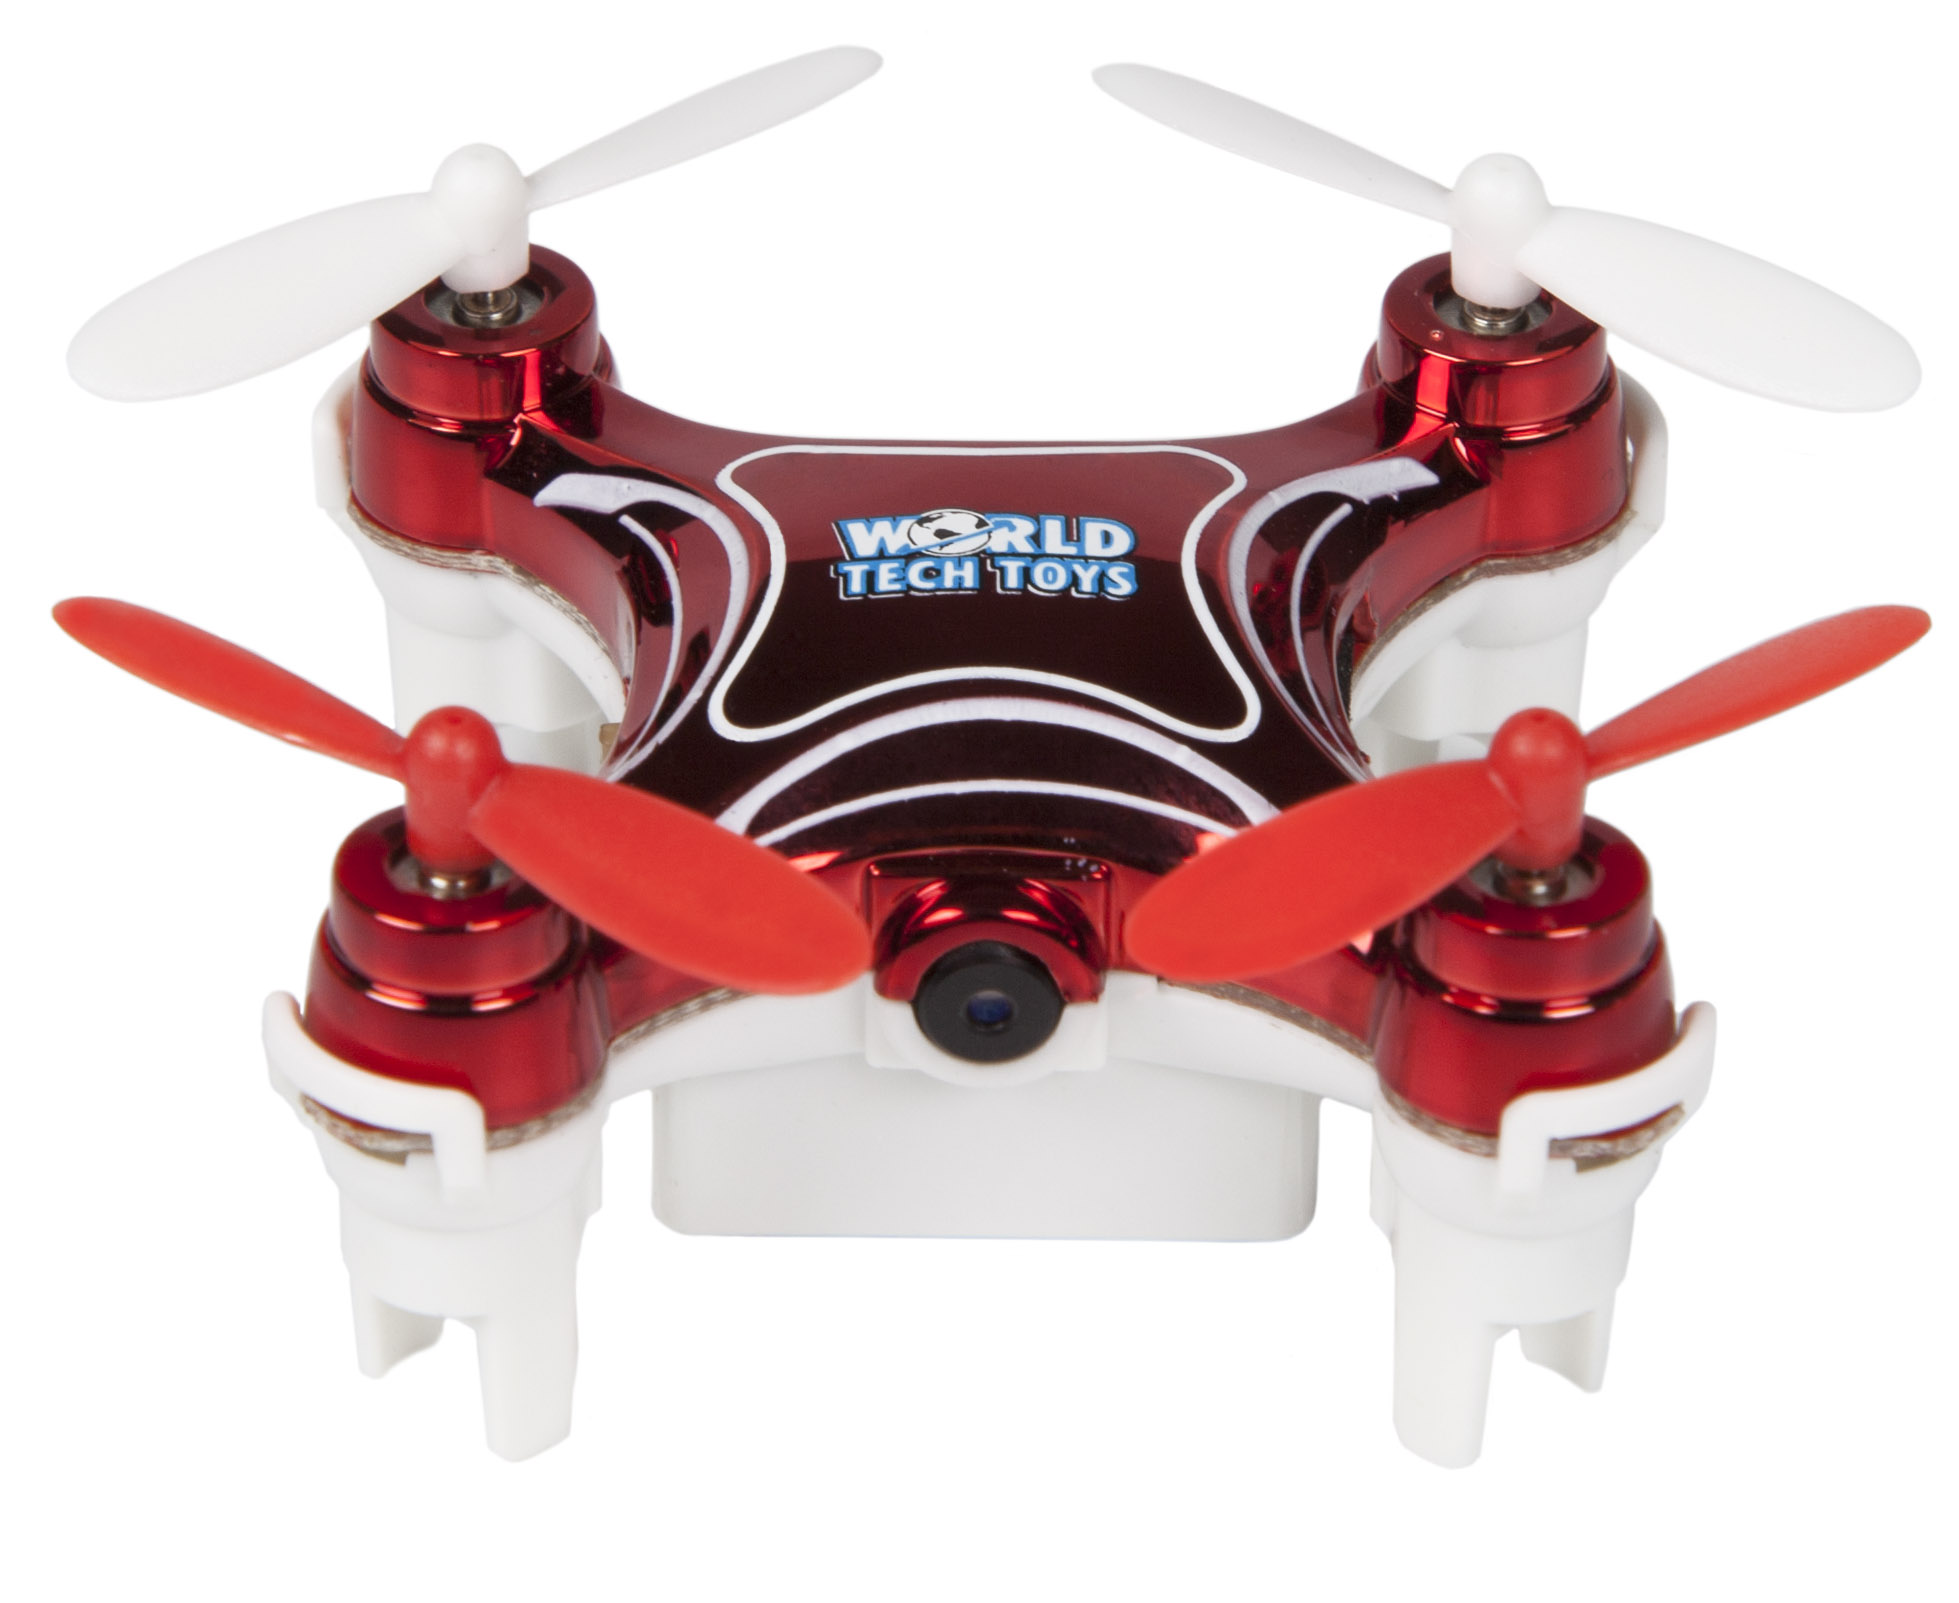 Nemo 2.4GHz 4.5-Channel Camera R/C Spy Drone(Colors may vary) - image 1 of 4